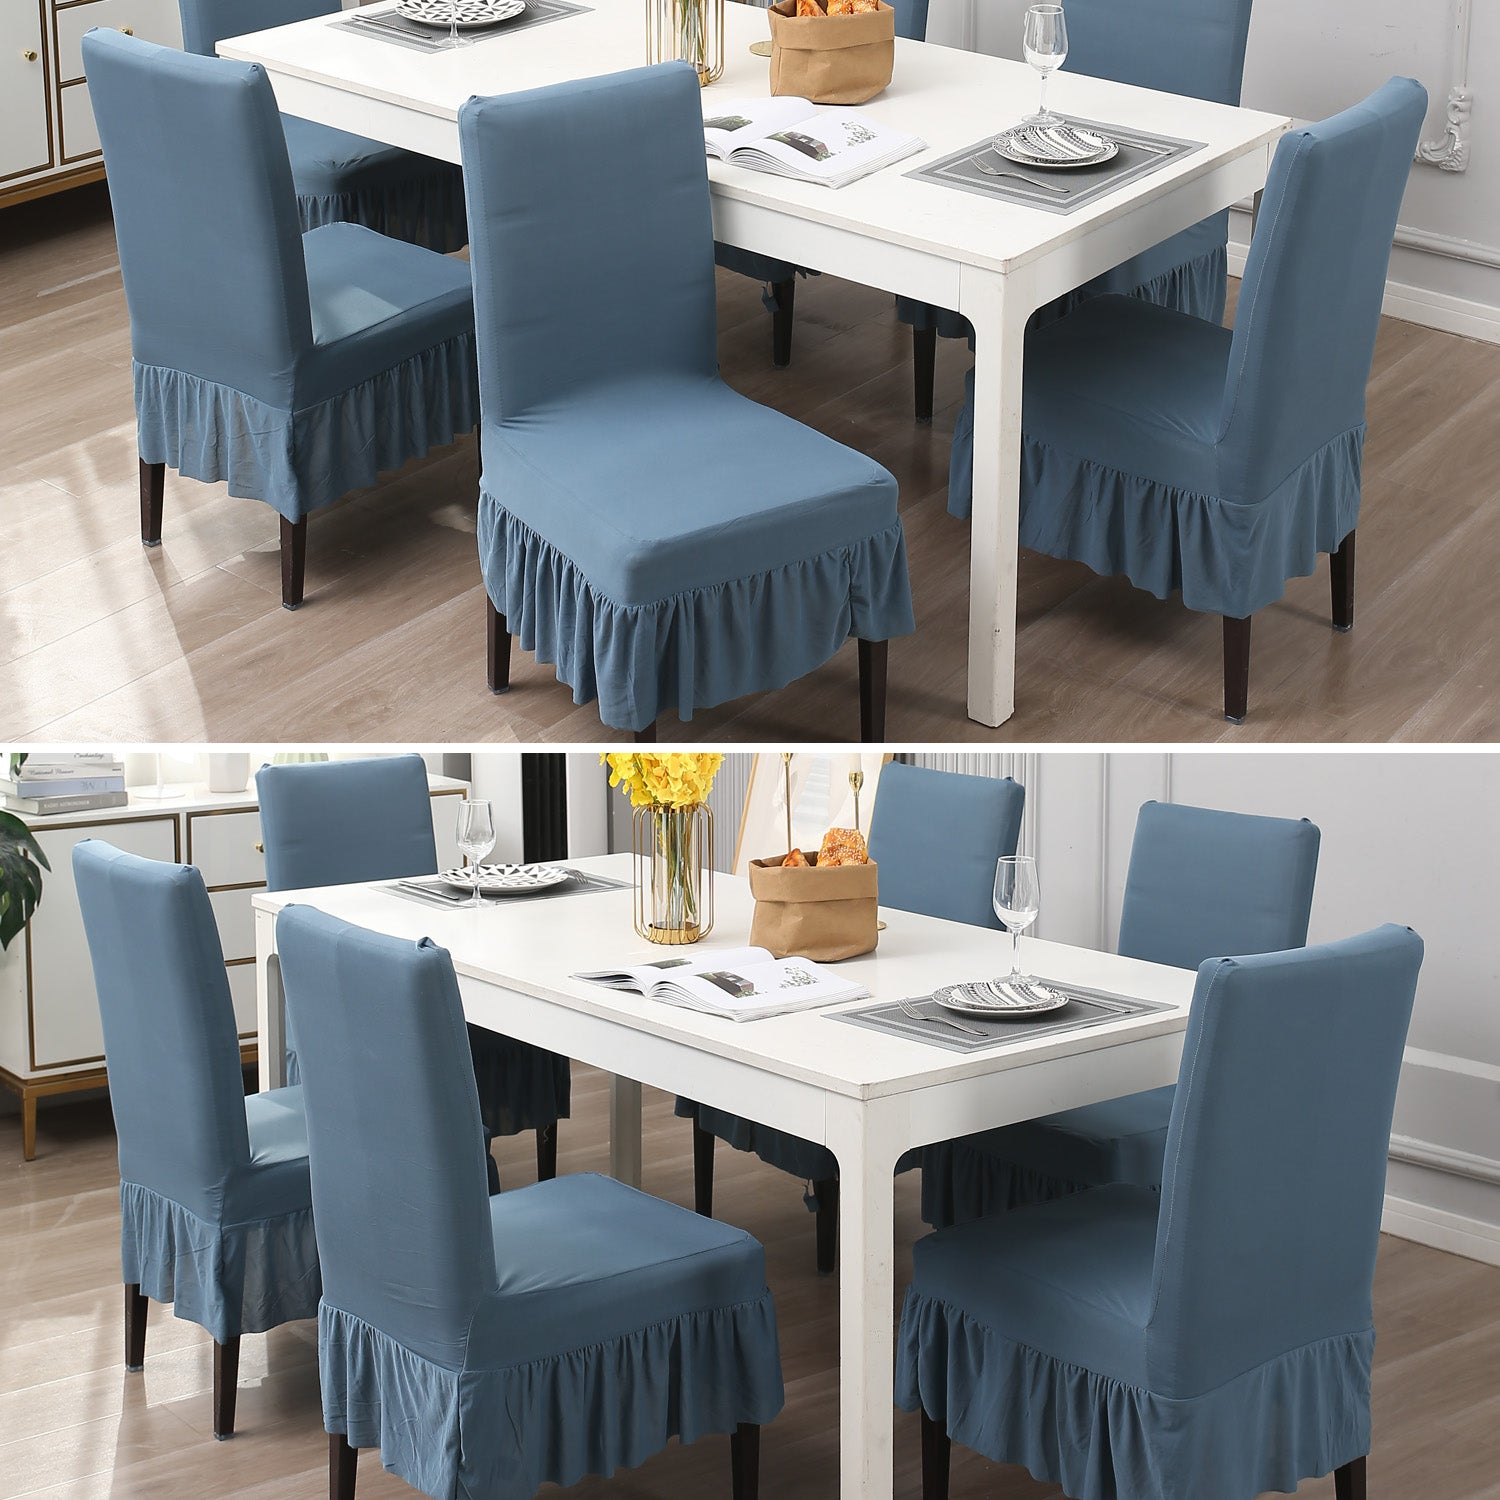 Elastic Stretchable Dining Chair Cover with Frill, Bluish Grey